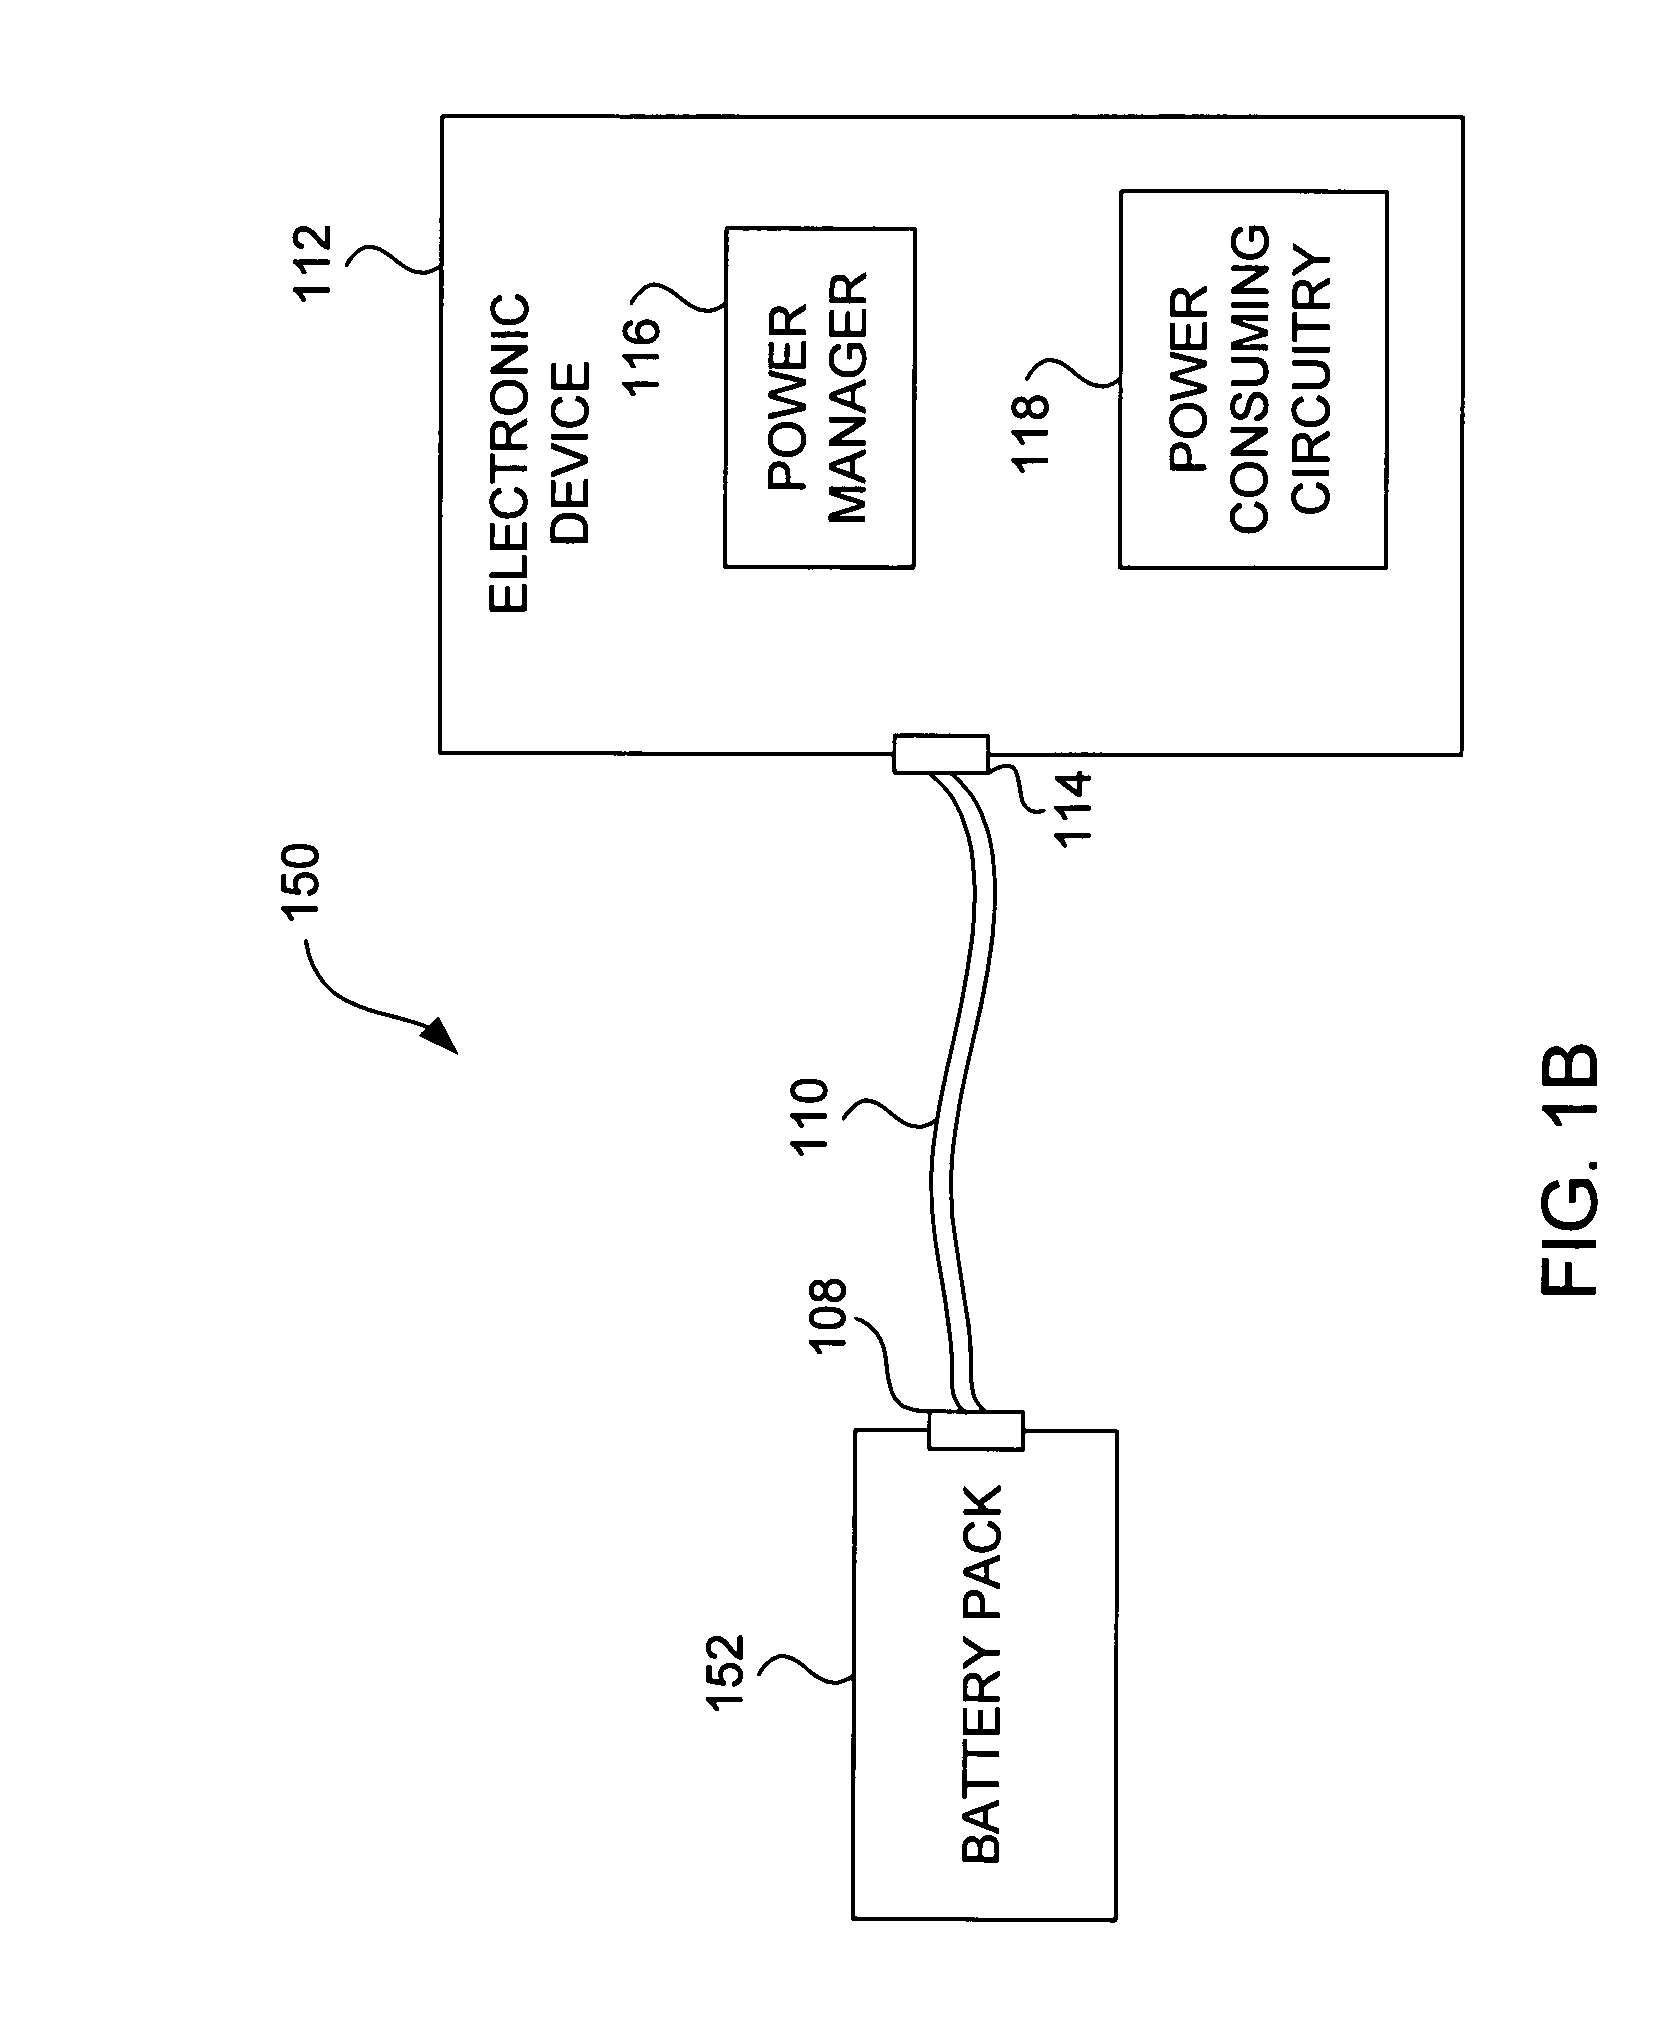 Method and system for discovering a power source on a peripheral bus